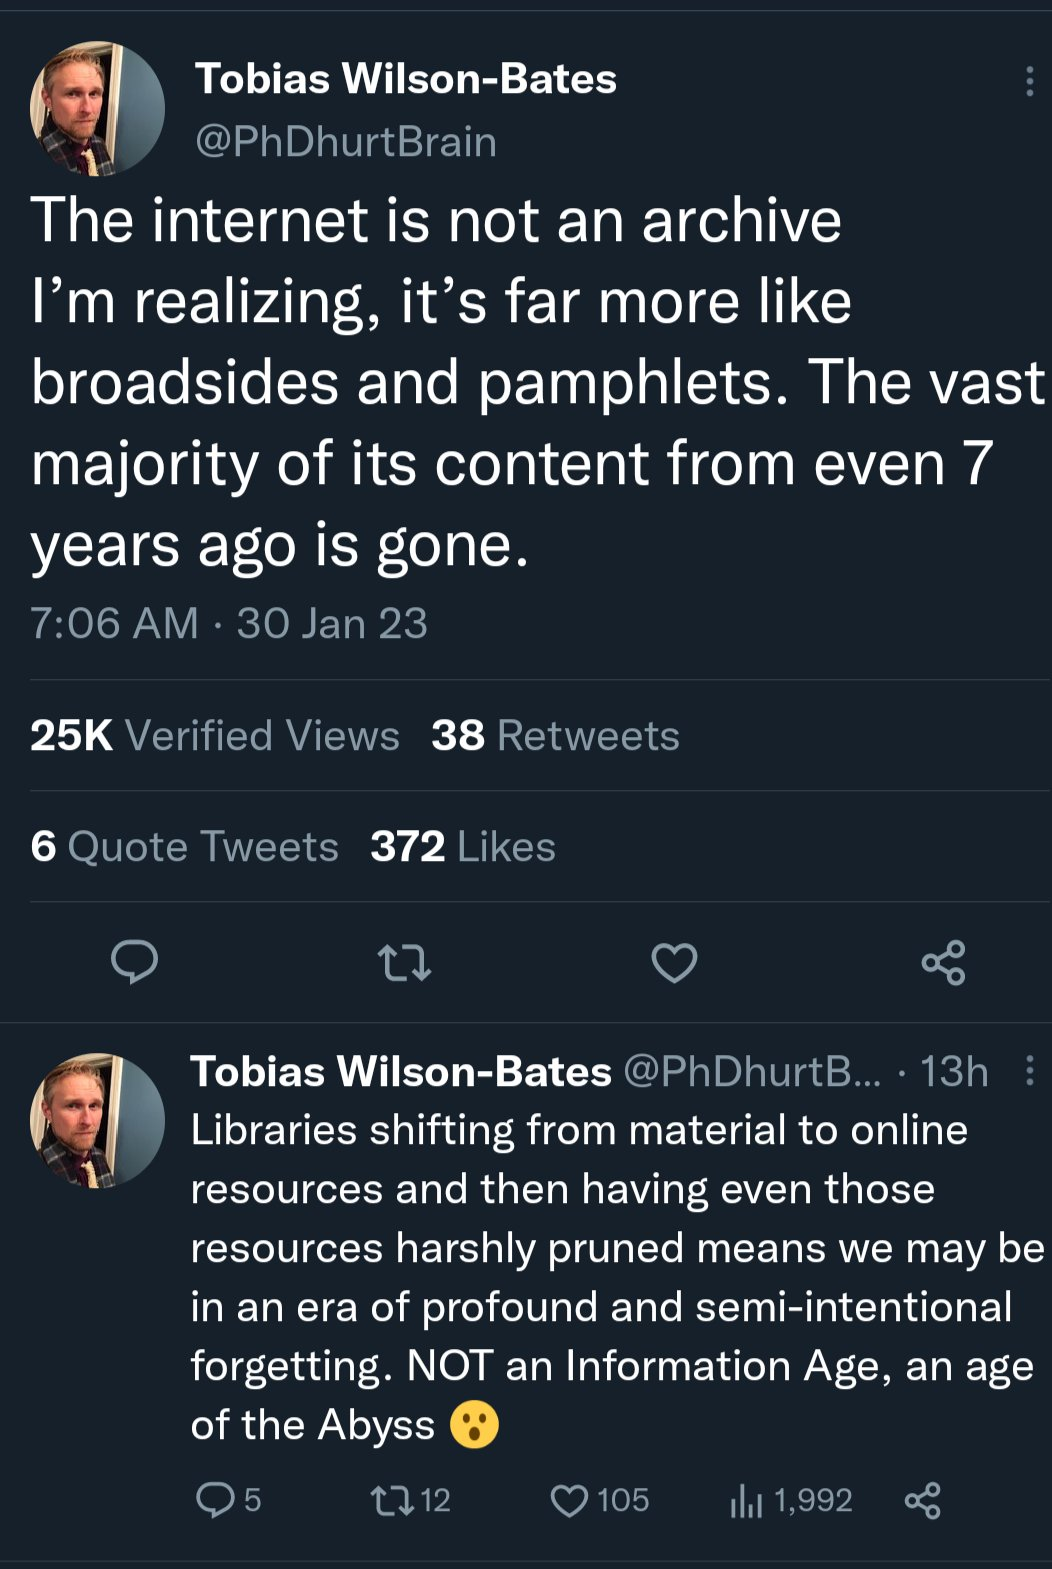 Person realizing that the internet is not an archive, more like broadsides and pamphlets, the vast majority of content from 7 years ago is gone. And noting that online resources libraries shift to getting cut back means we're getting more loss.